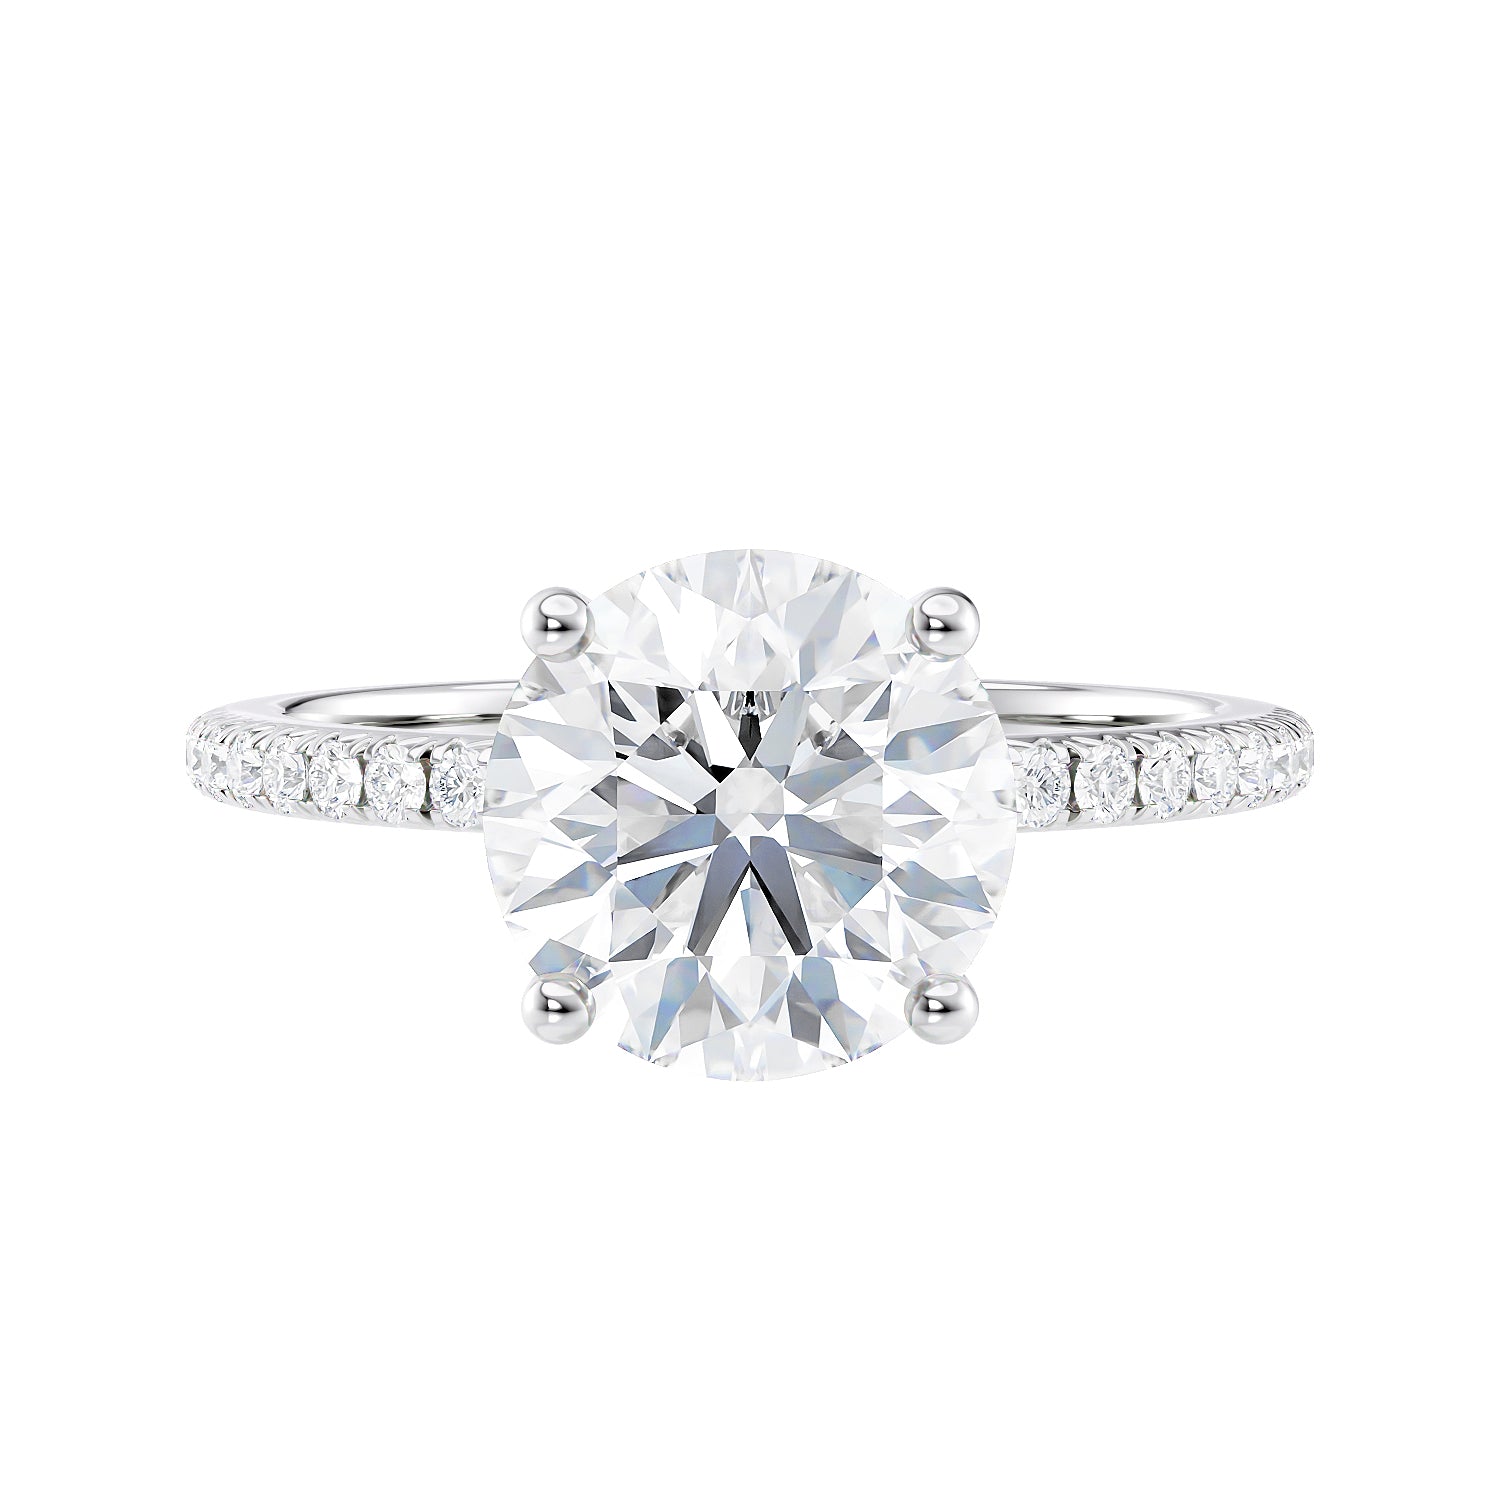 Brilliant cut lab grown diamond solitaire engagement ring with slim diamond set band white gold front view.